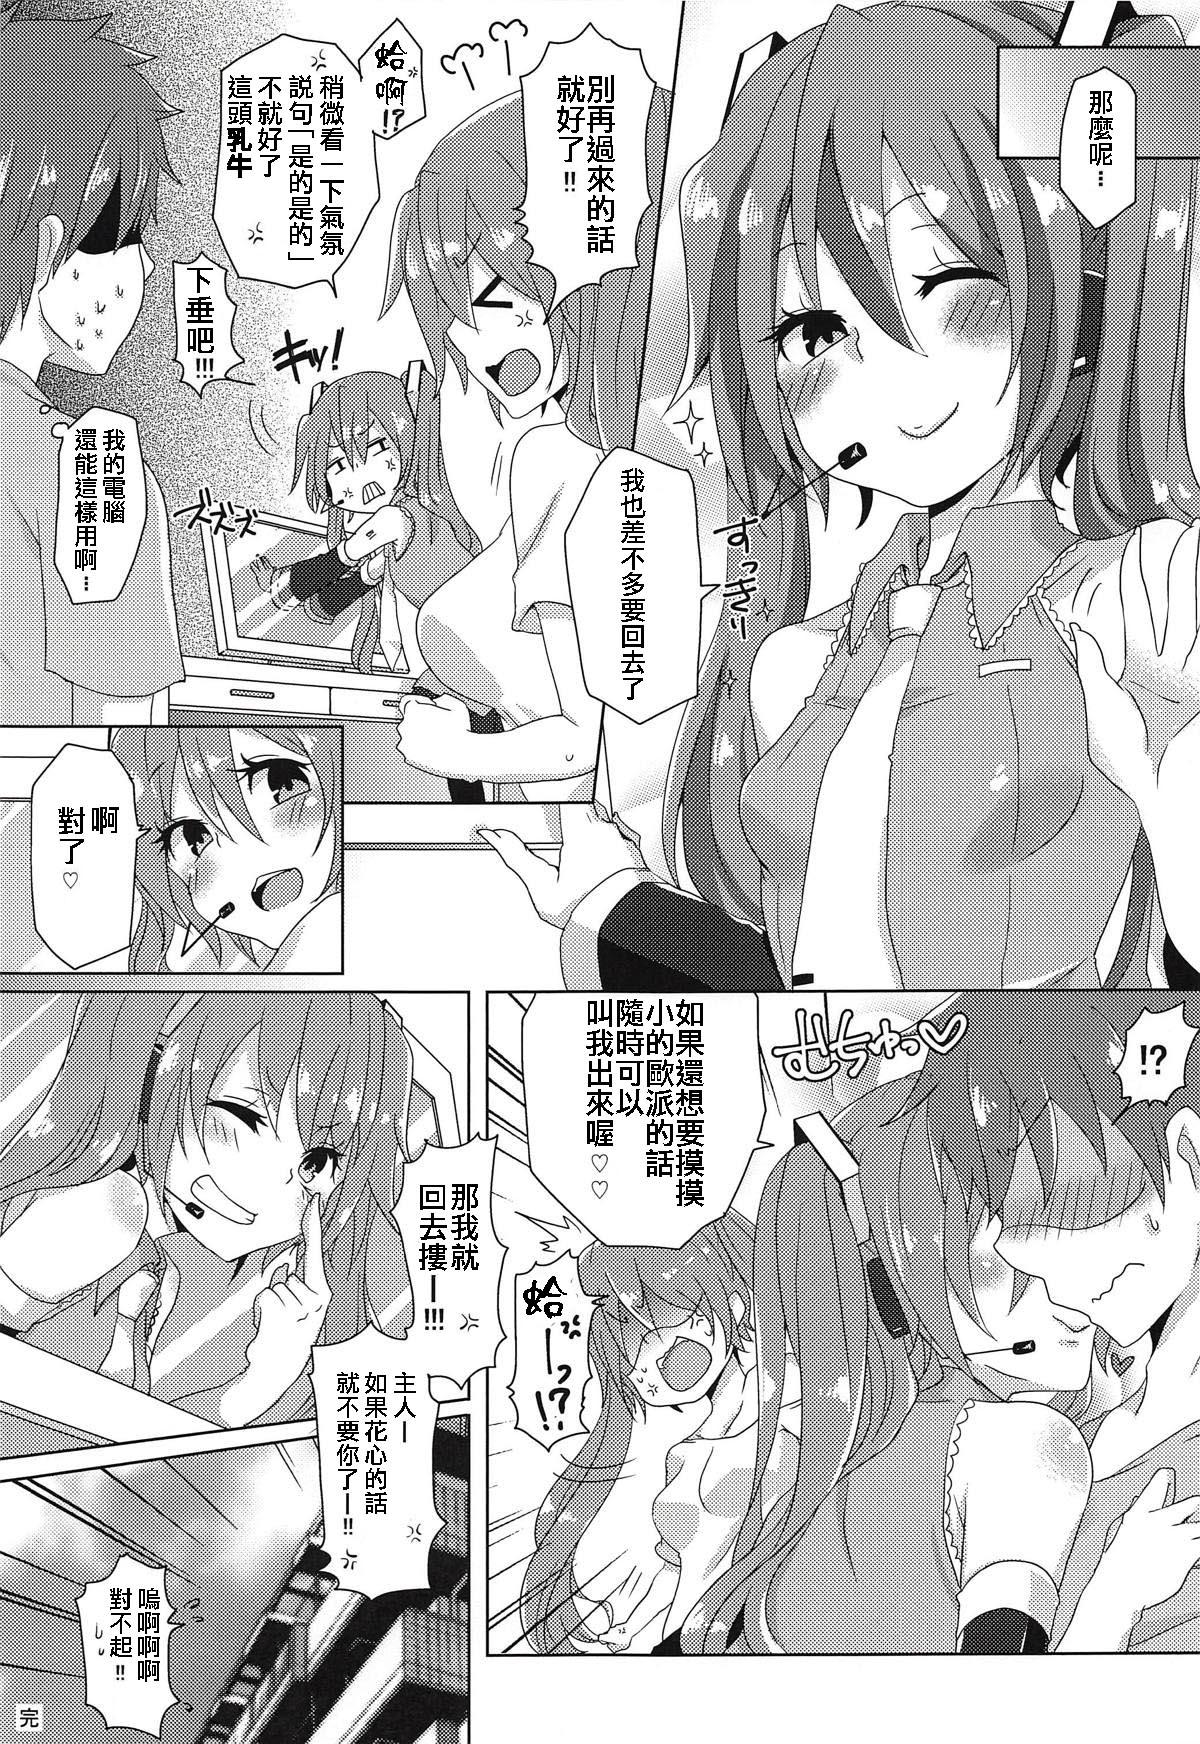 Colombia (THE VOC@LOiD M@STER 41) [Kusoyuridanchi (Johnson)] Chippai-san to Deppai-san (VOCALOID) [Chinese] [舒馬克個人漢化] - Vocaloid Black Woman - Page 24